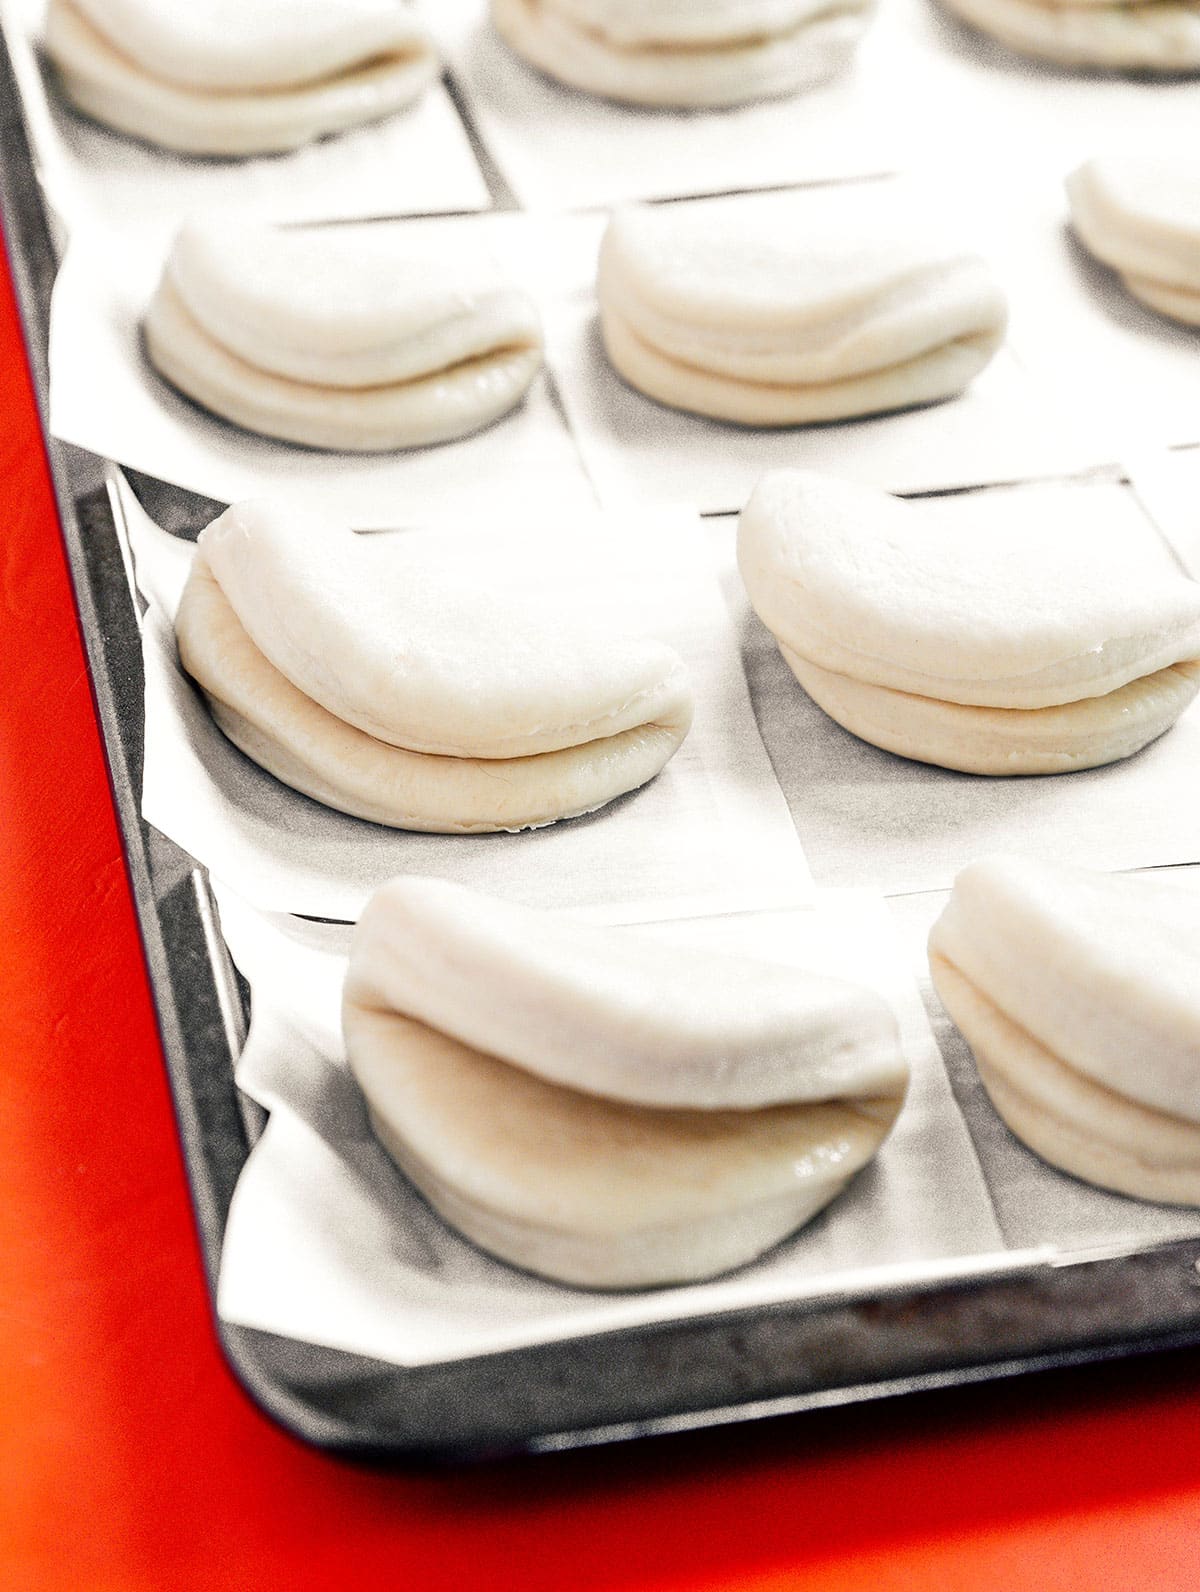 A baking sheet lined with parchment paper squares topped with uncooked bao buns